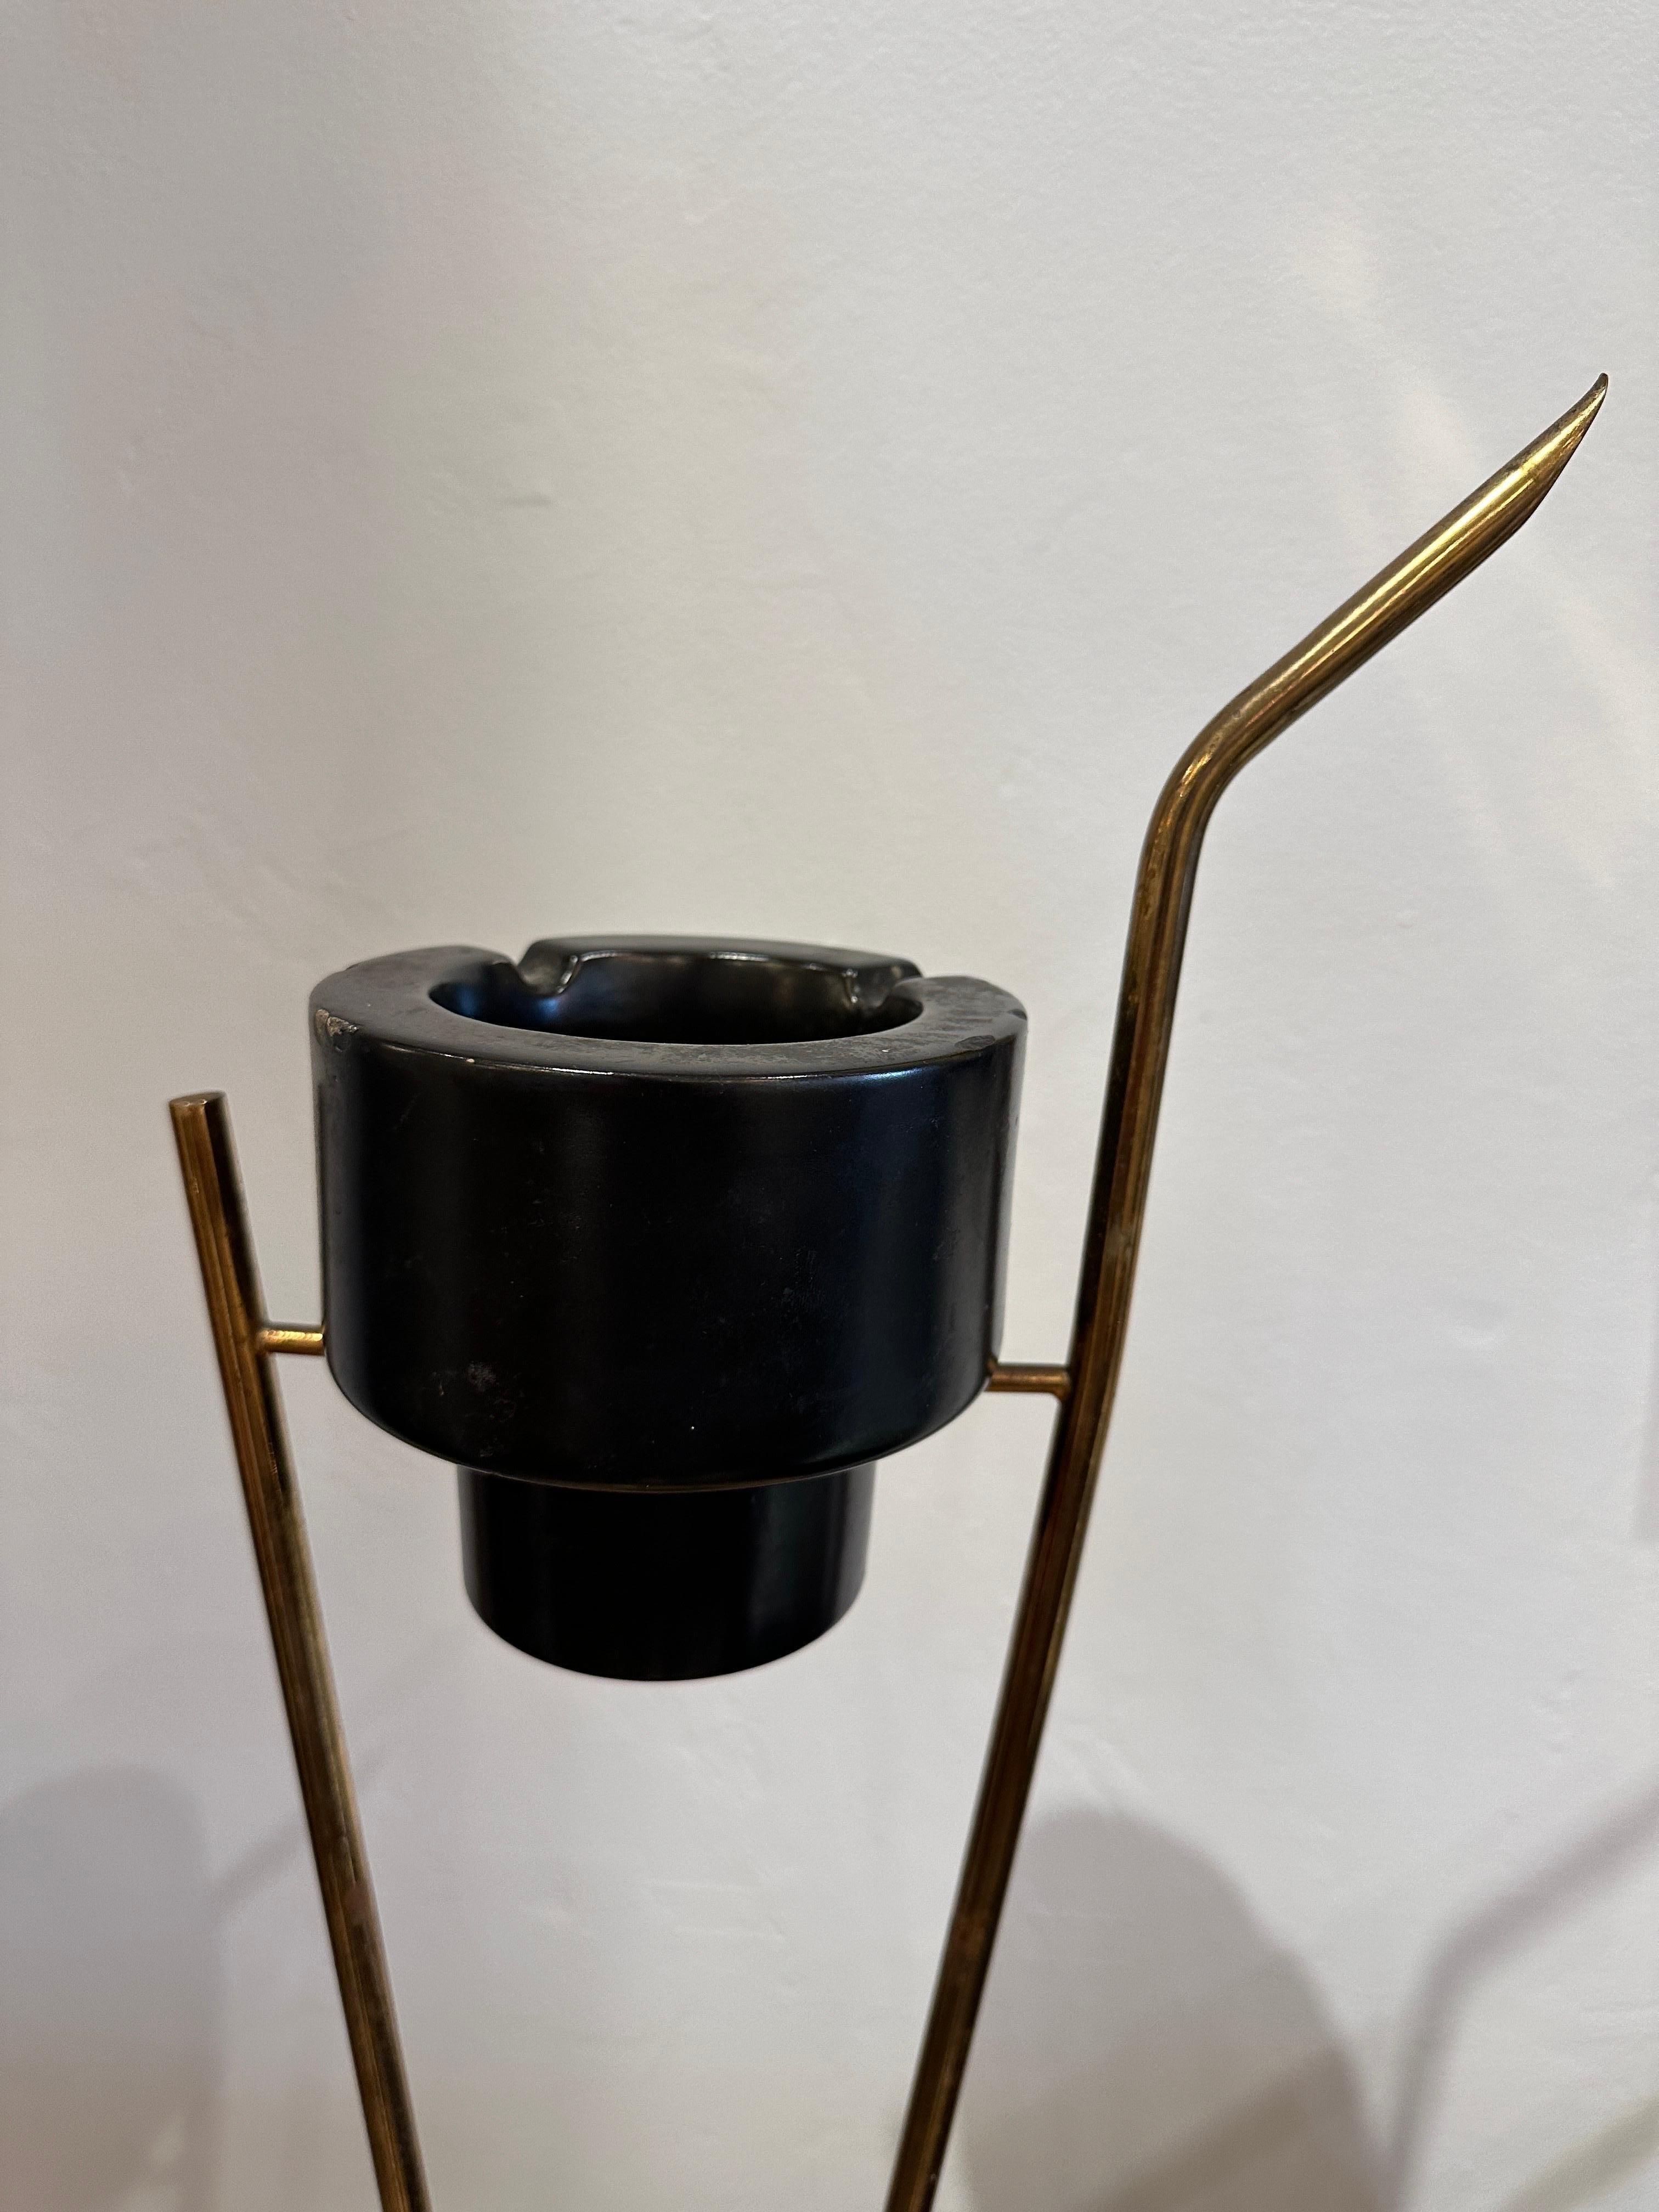 This French ashtray stand with brass body and metal base, has an original black ceramic bowl with a few flea bite chips.  